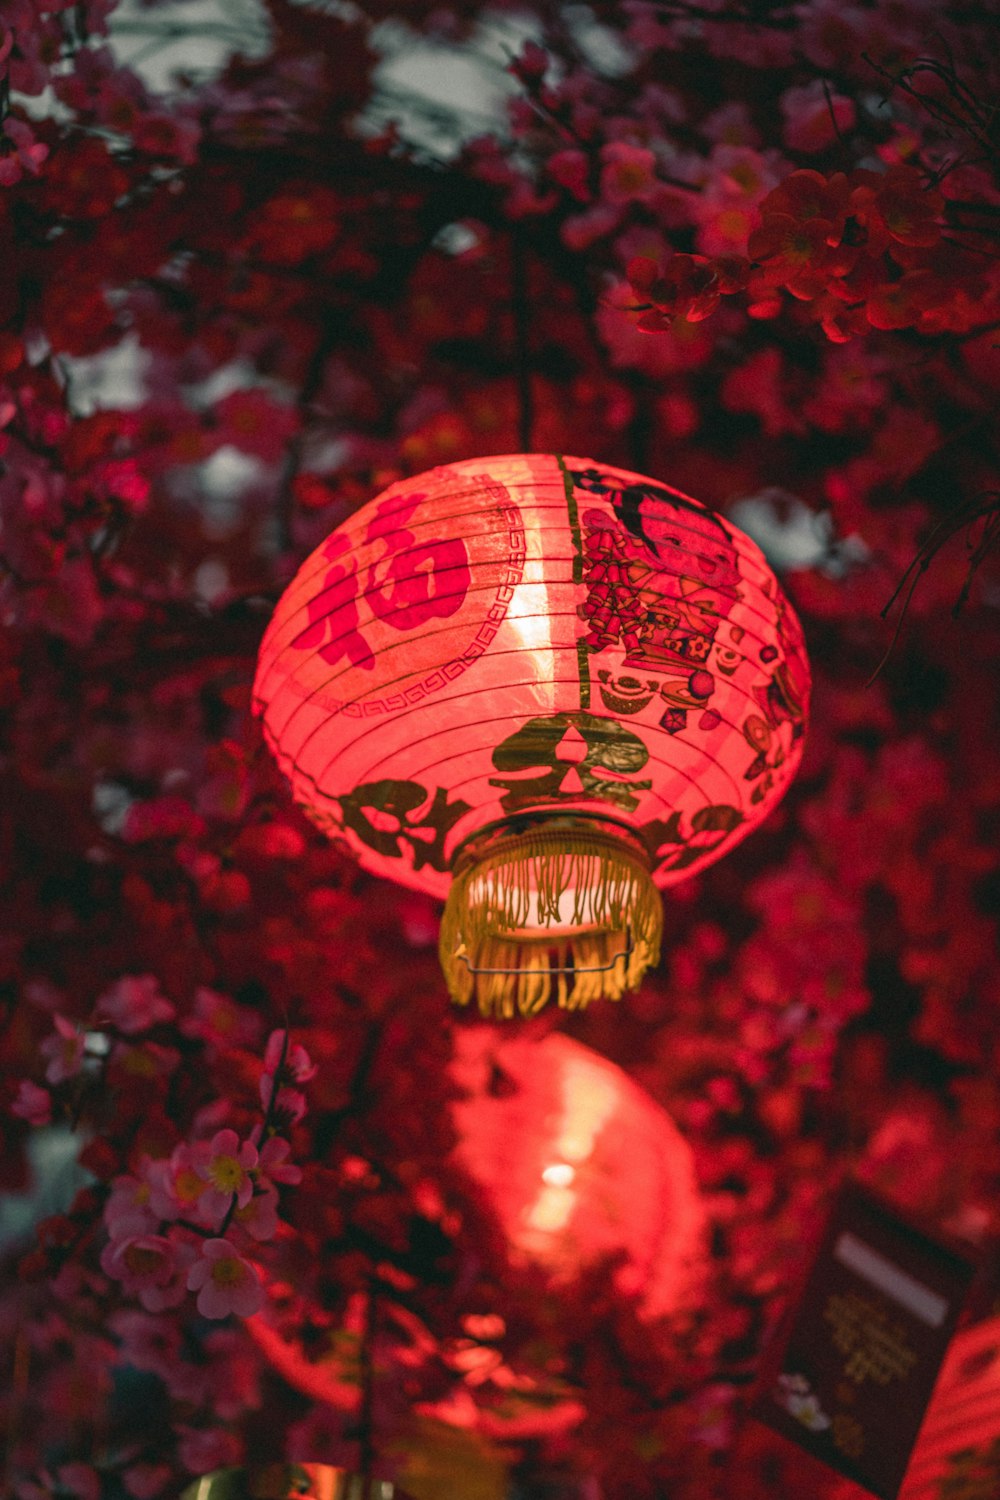 100+ Lantern Pictures  Download Free Images & Stock Photos on Unsplash